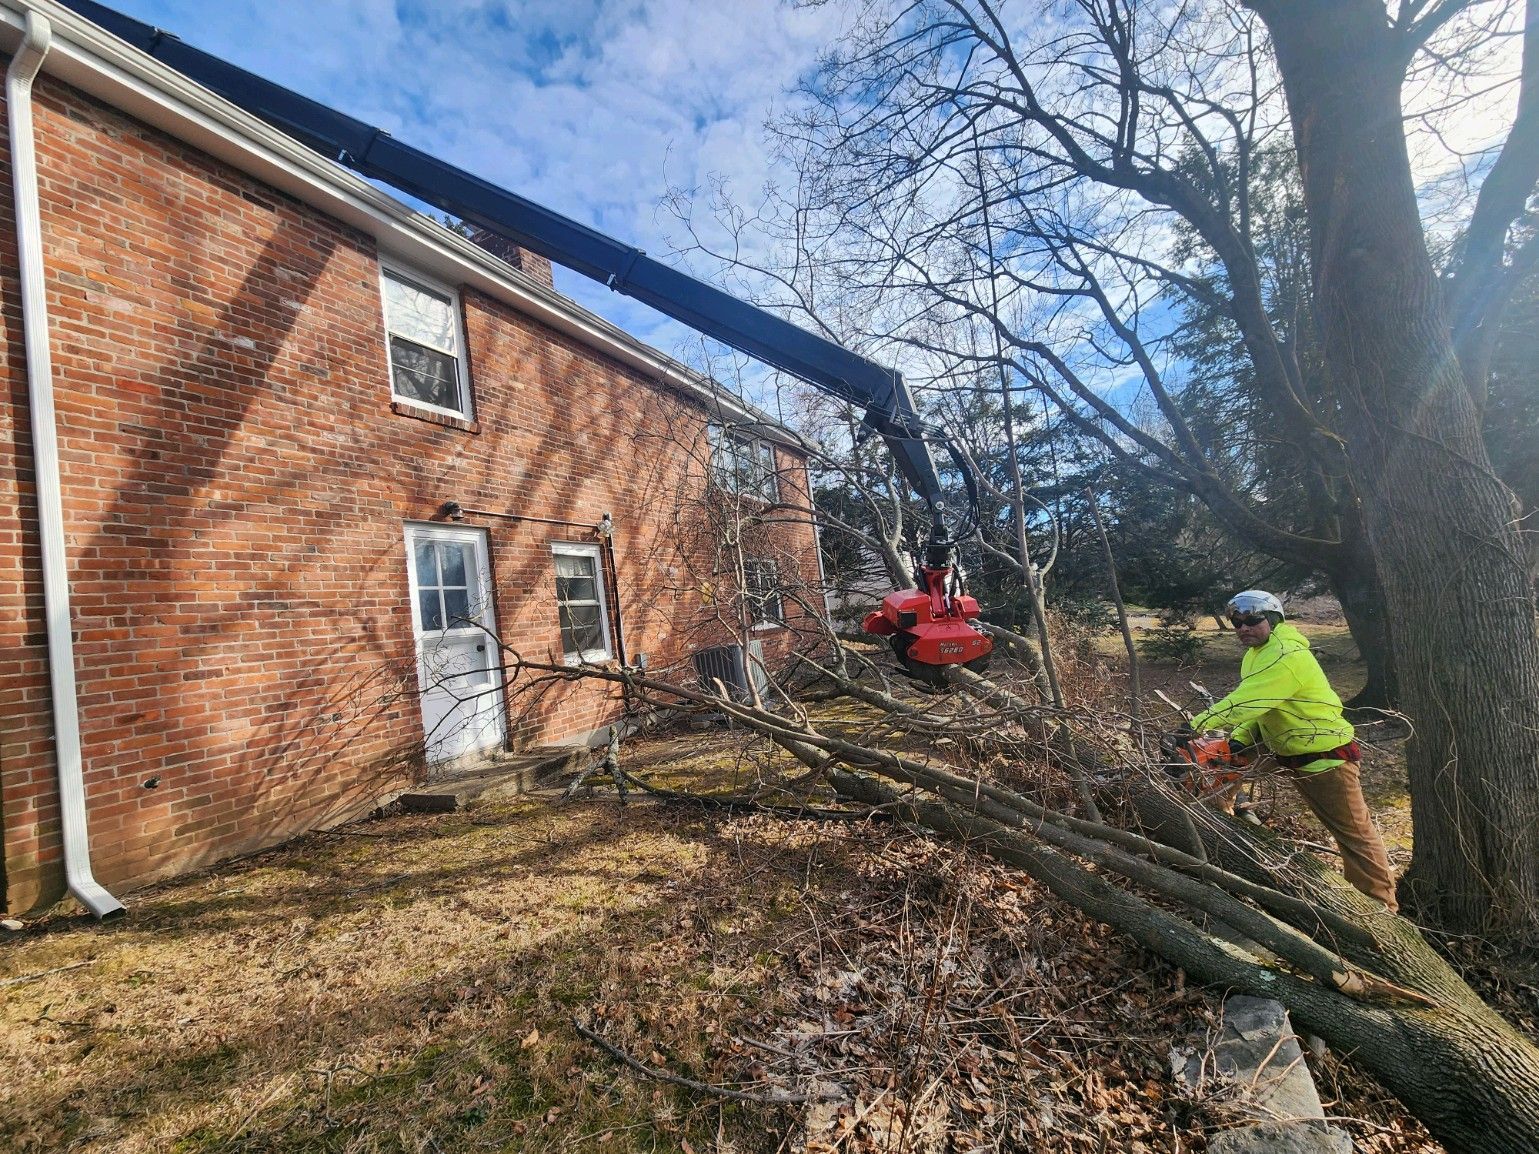 Emergency Tree Work Removal Company working in West Hartford, CT